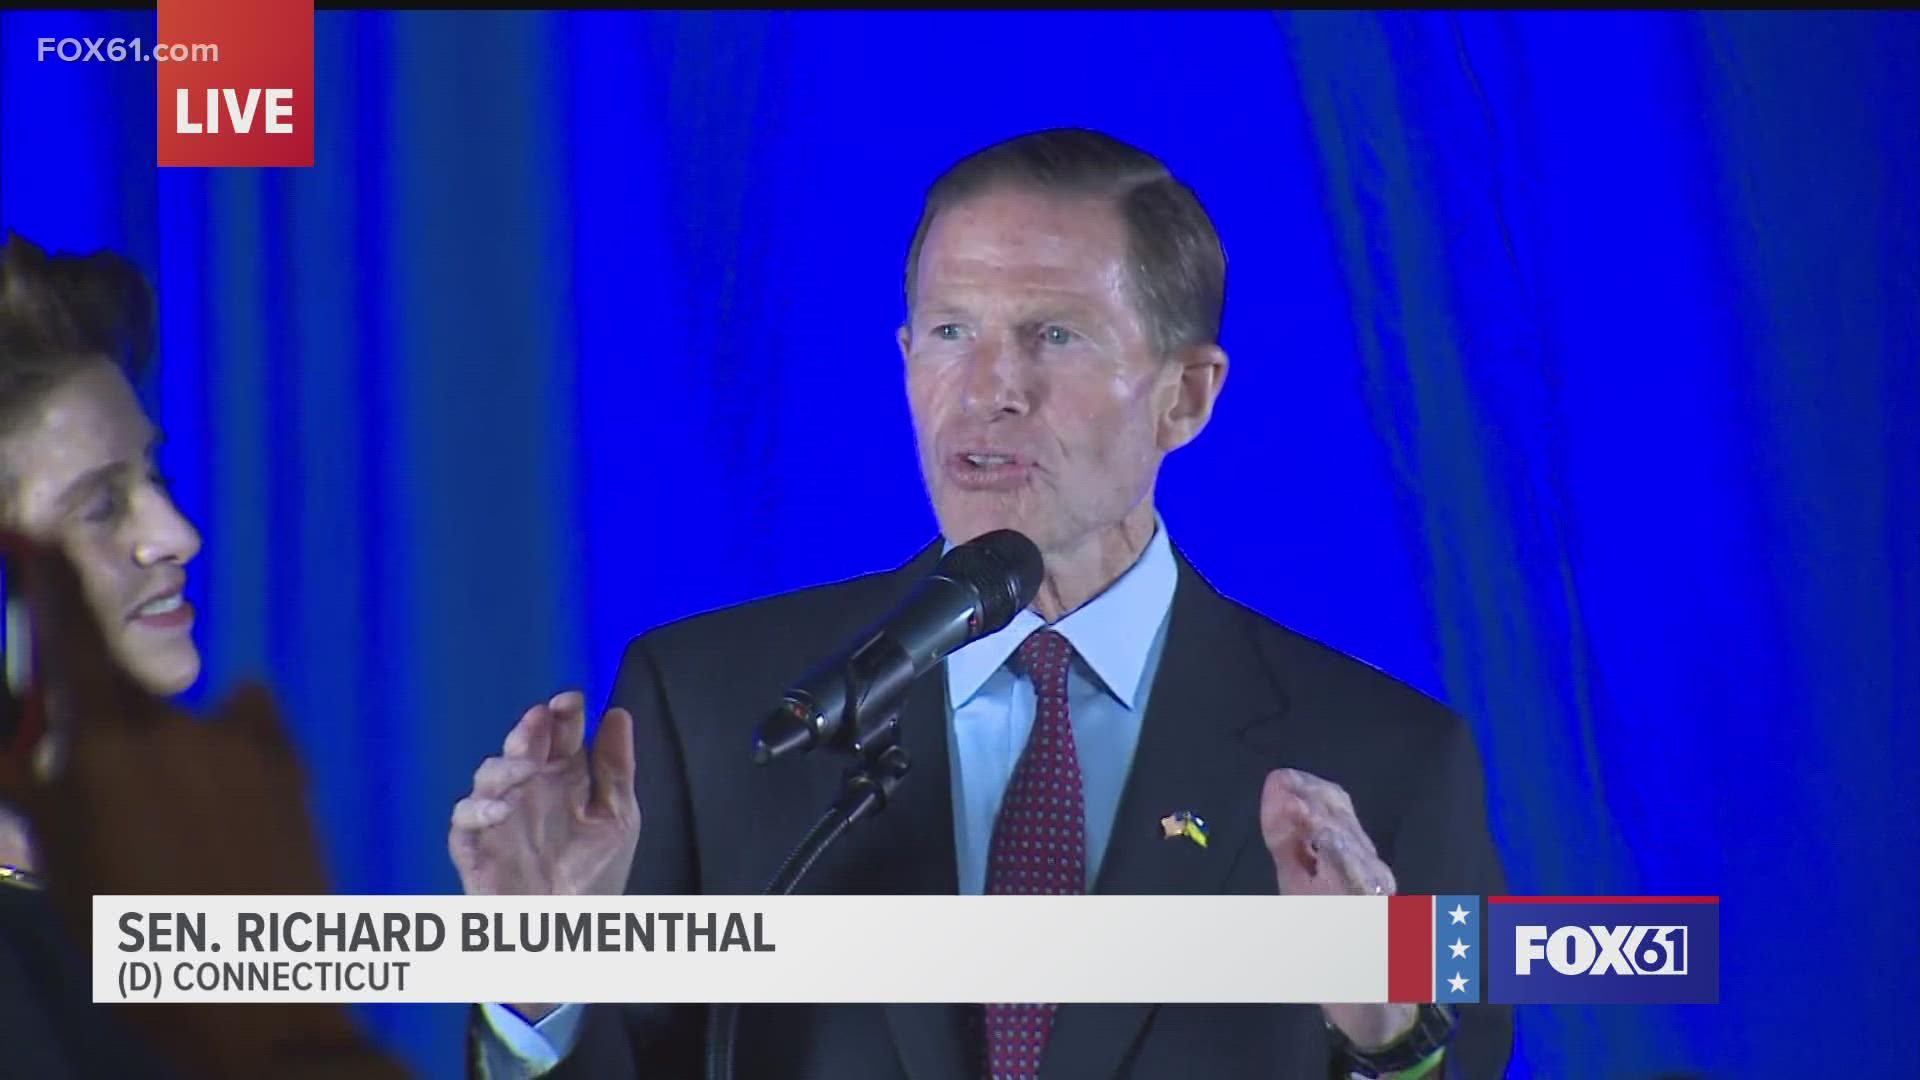 Blumenthal says he'll continue to fight for those in Connecticut who did and did not vote for him.